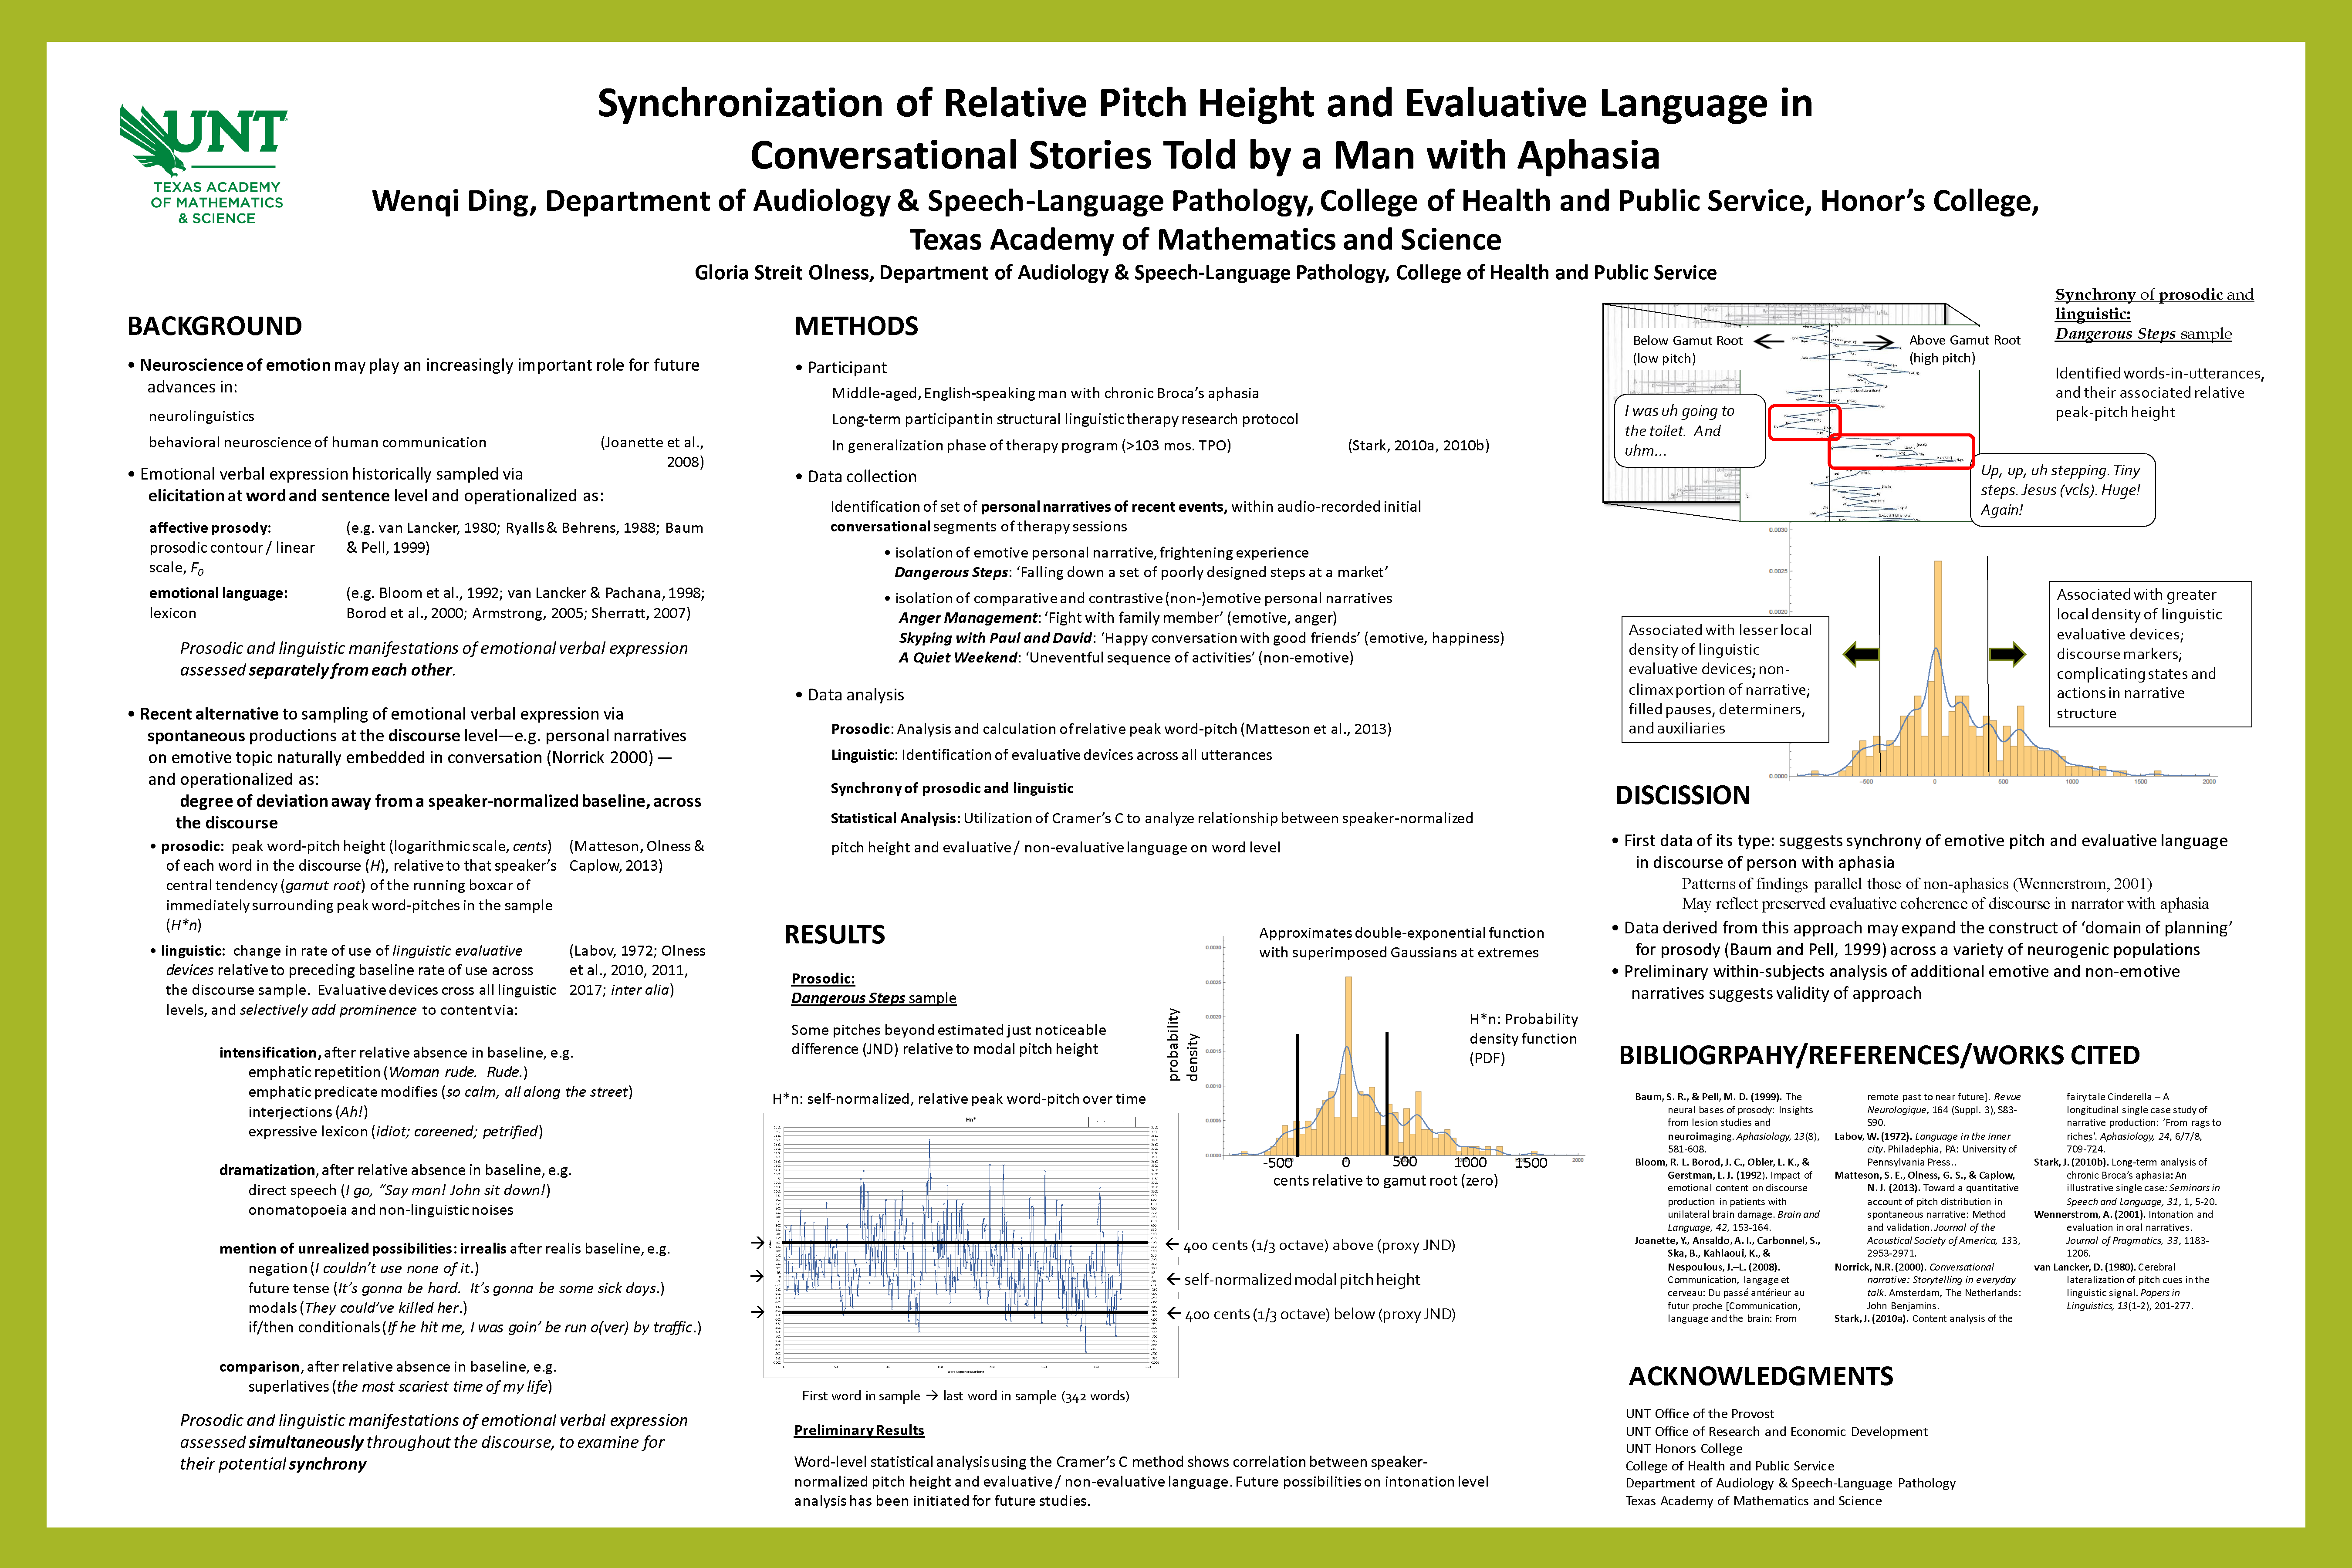 Synchronization of Relative Pitch Height and Evaluative Language in Conversational Stories Told by a